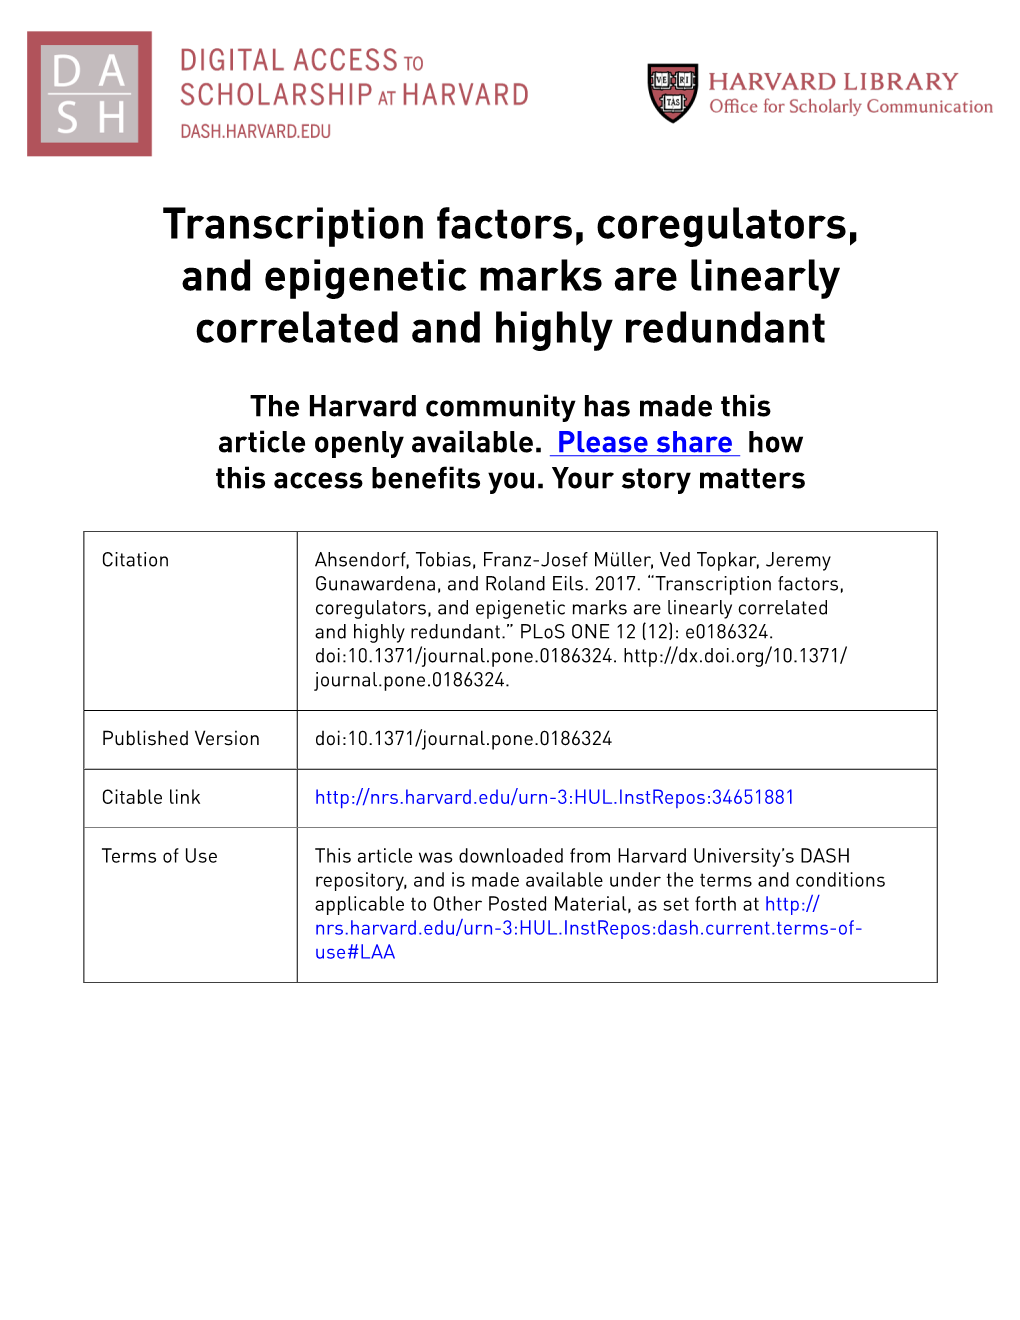 Transcription Factors, Coregulators, and Epigenetic Marks Are Linearly Correlated and Highly Redundant